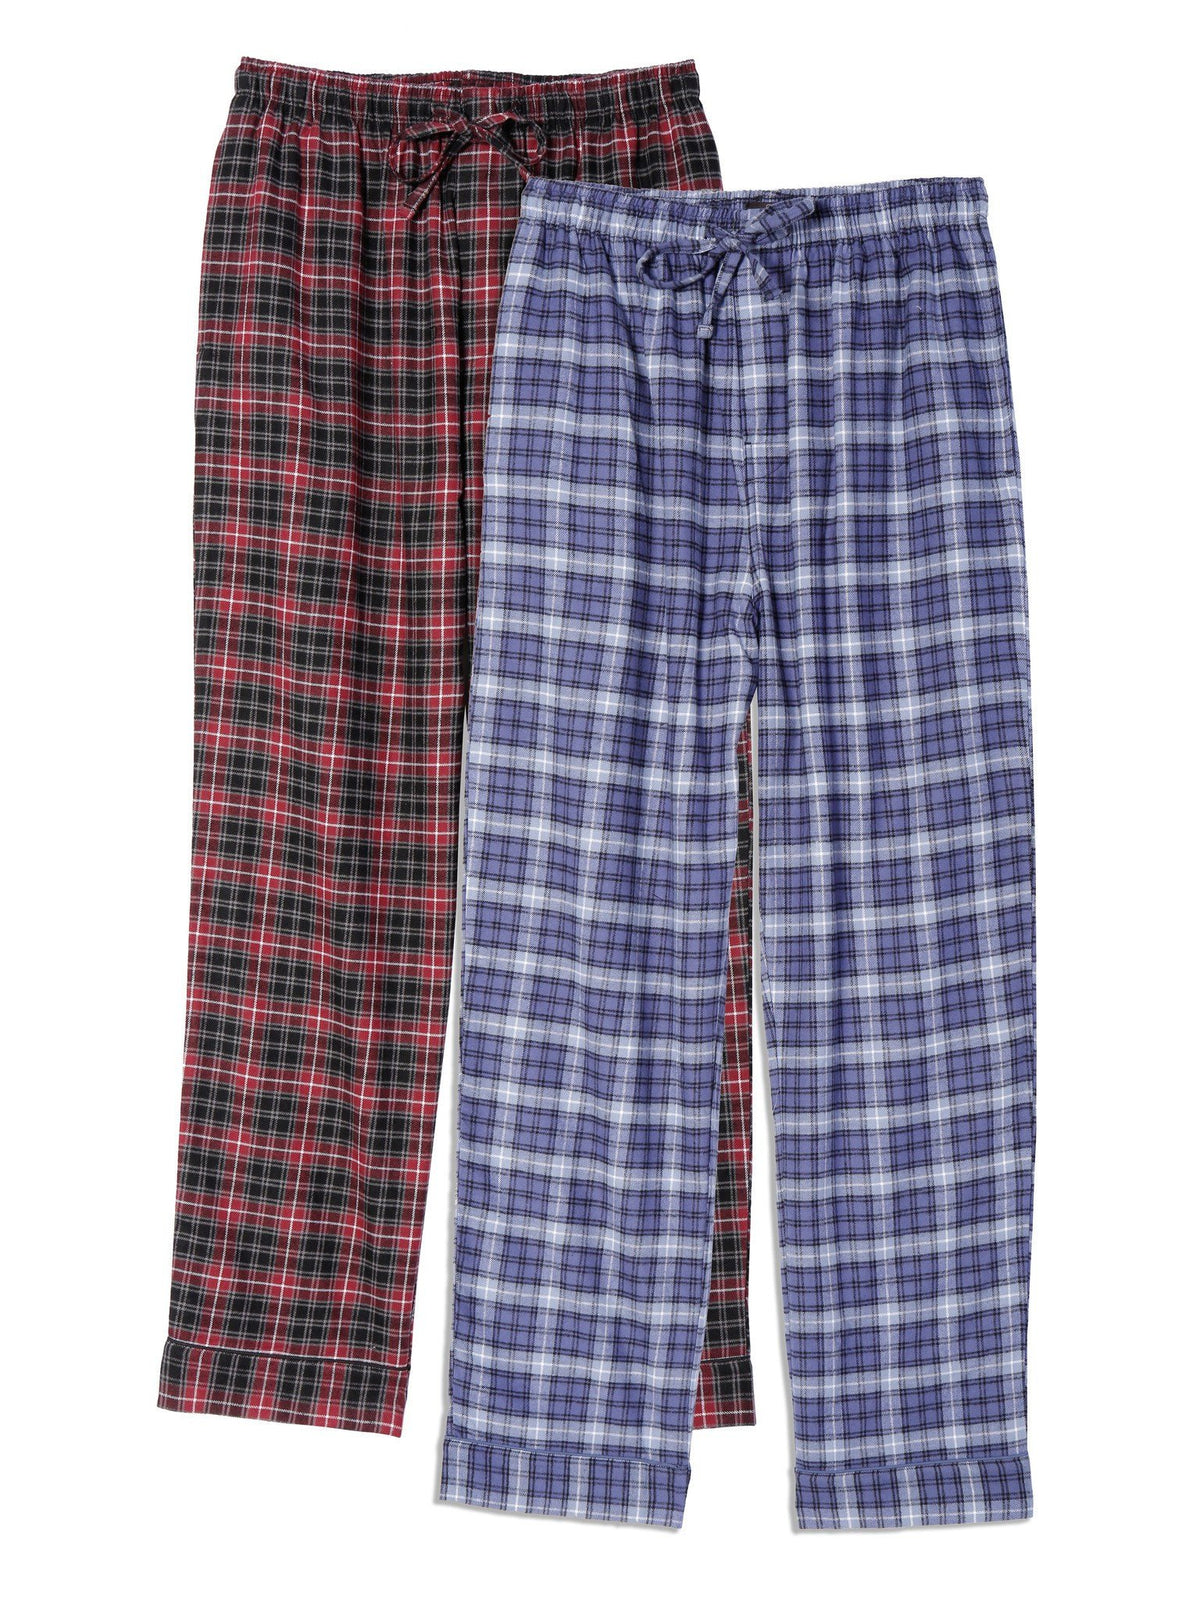 Mens 100% Cotton Flannel Lounge Pants (Relaxed Fit) 2-Pack - 2-Pack (Blue-White/Burgundy-Grey)